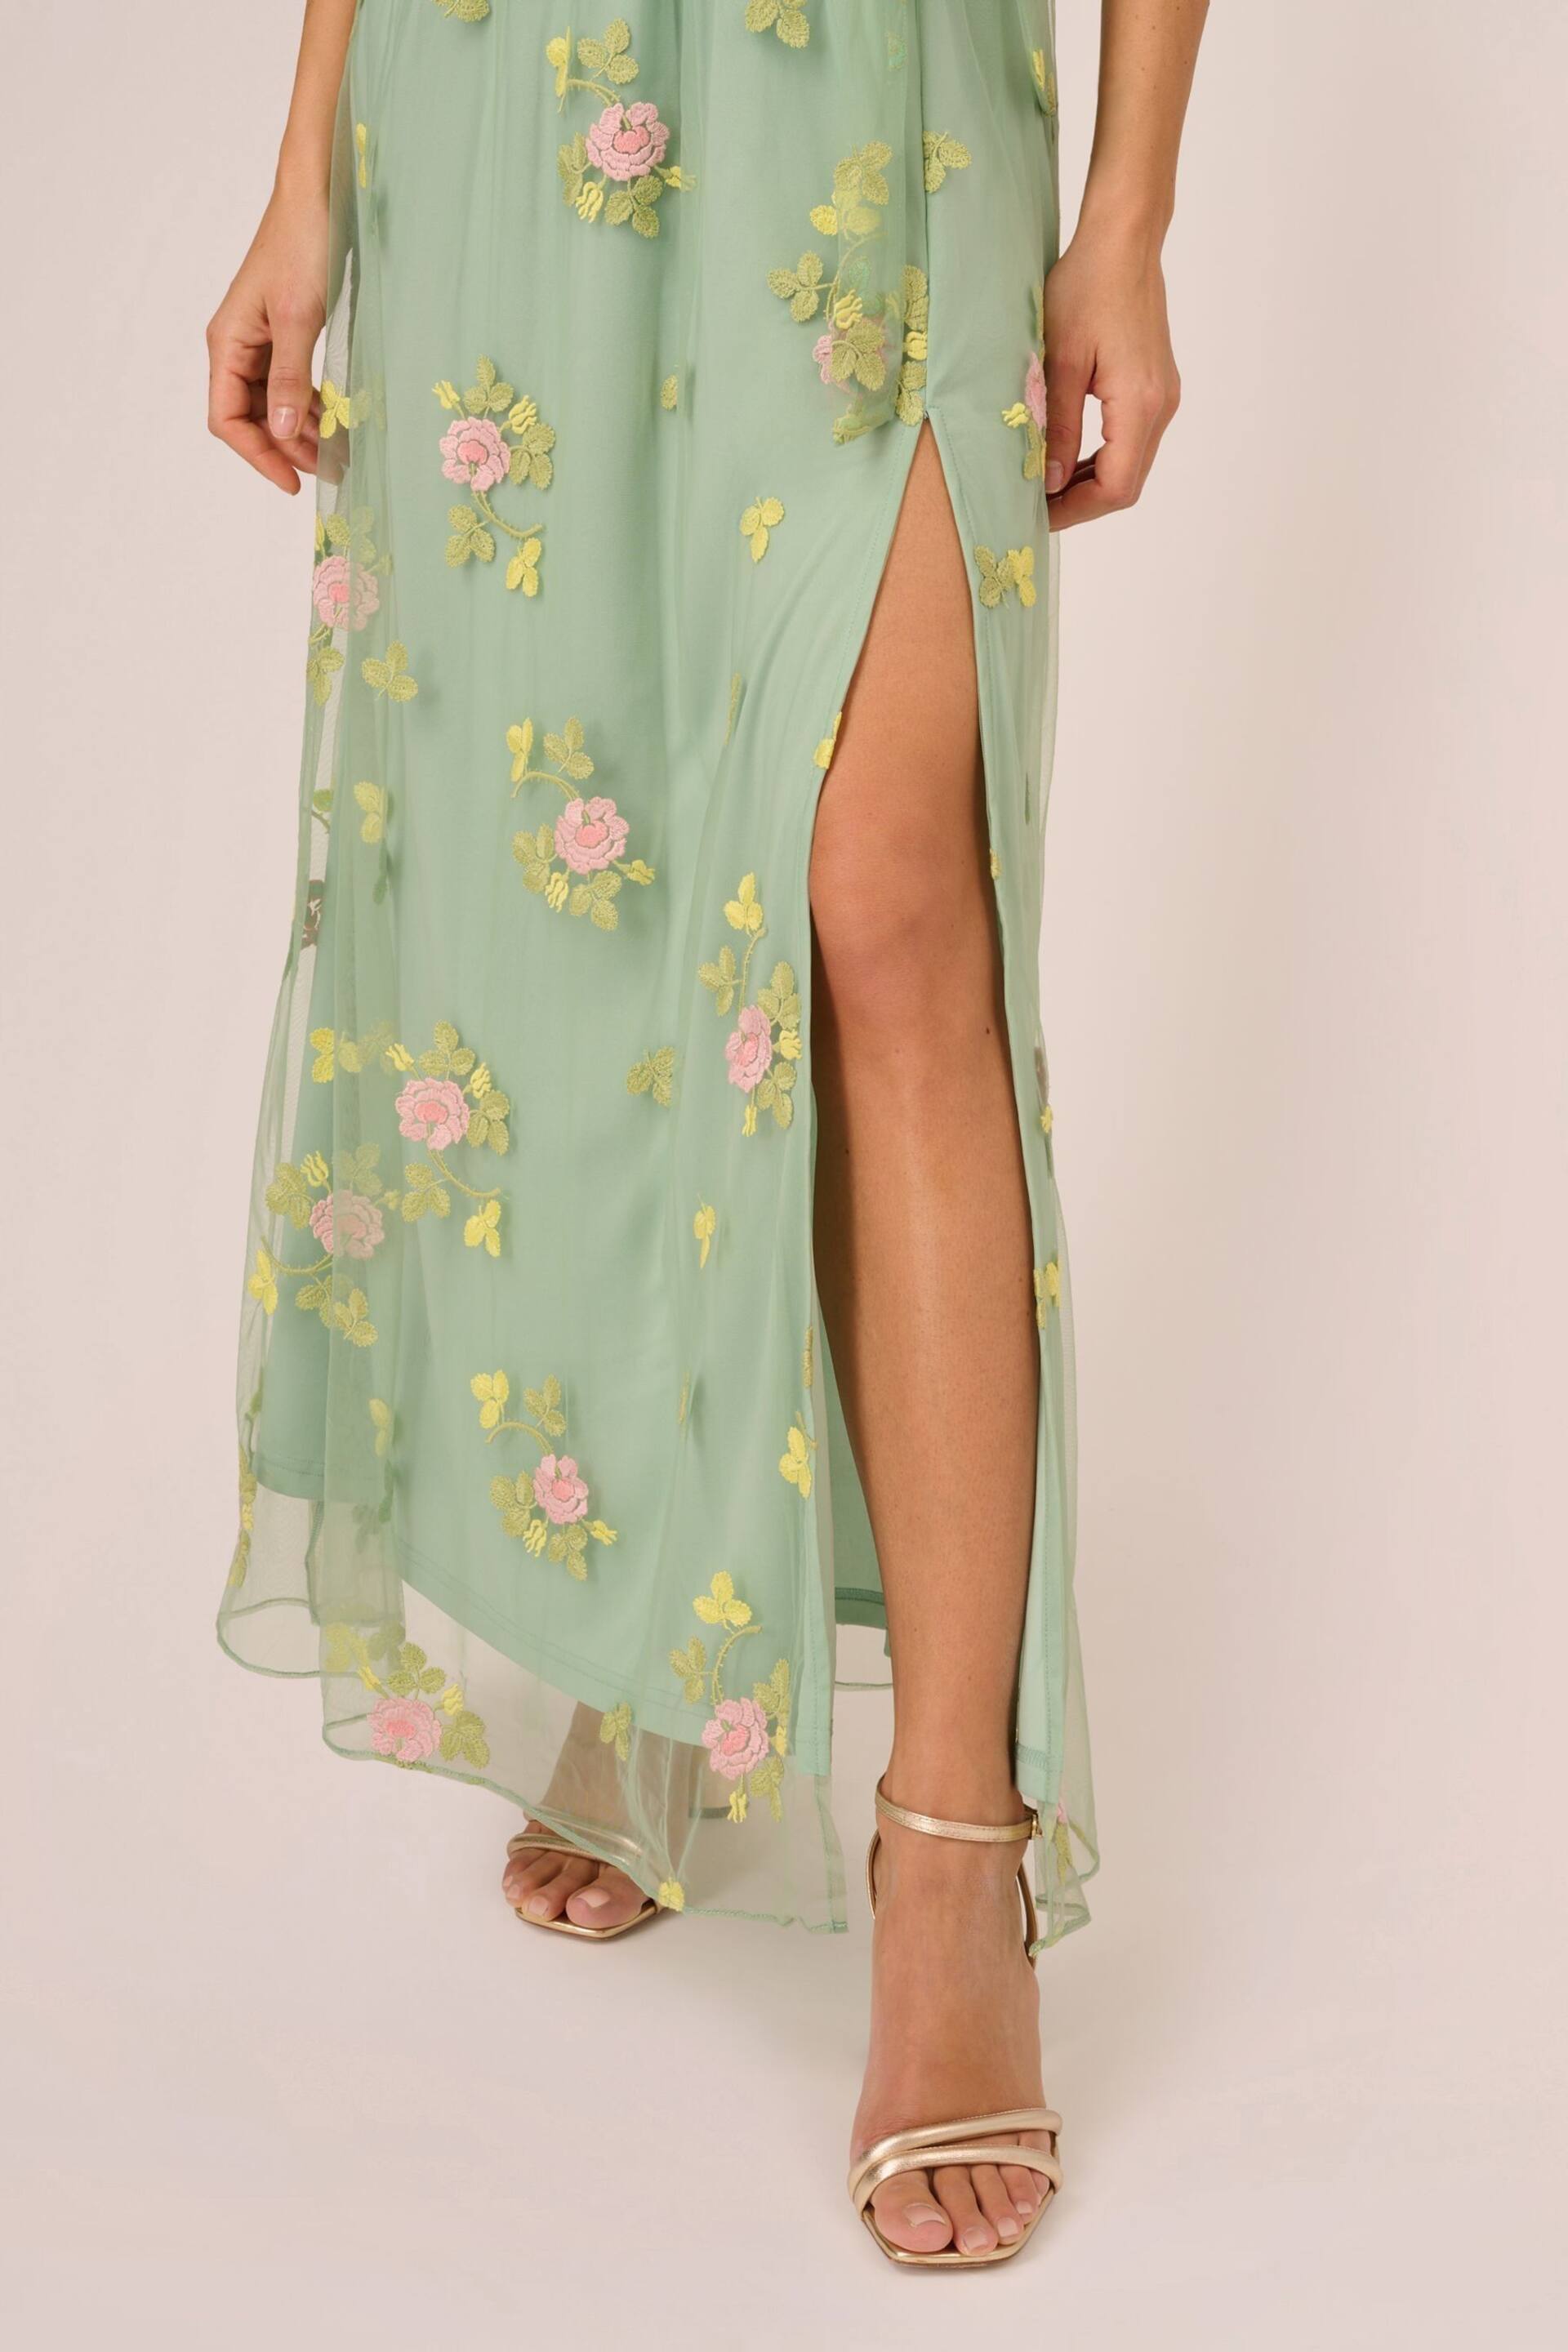 Adrianna Papell Green Embroidered Maxi Dress - Image 5 of 7